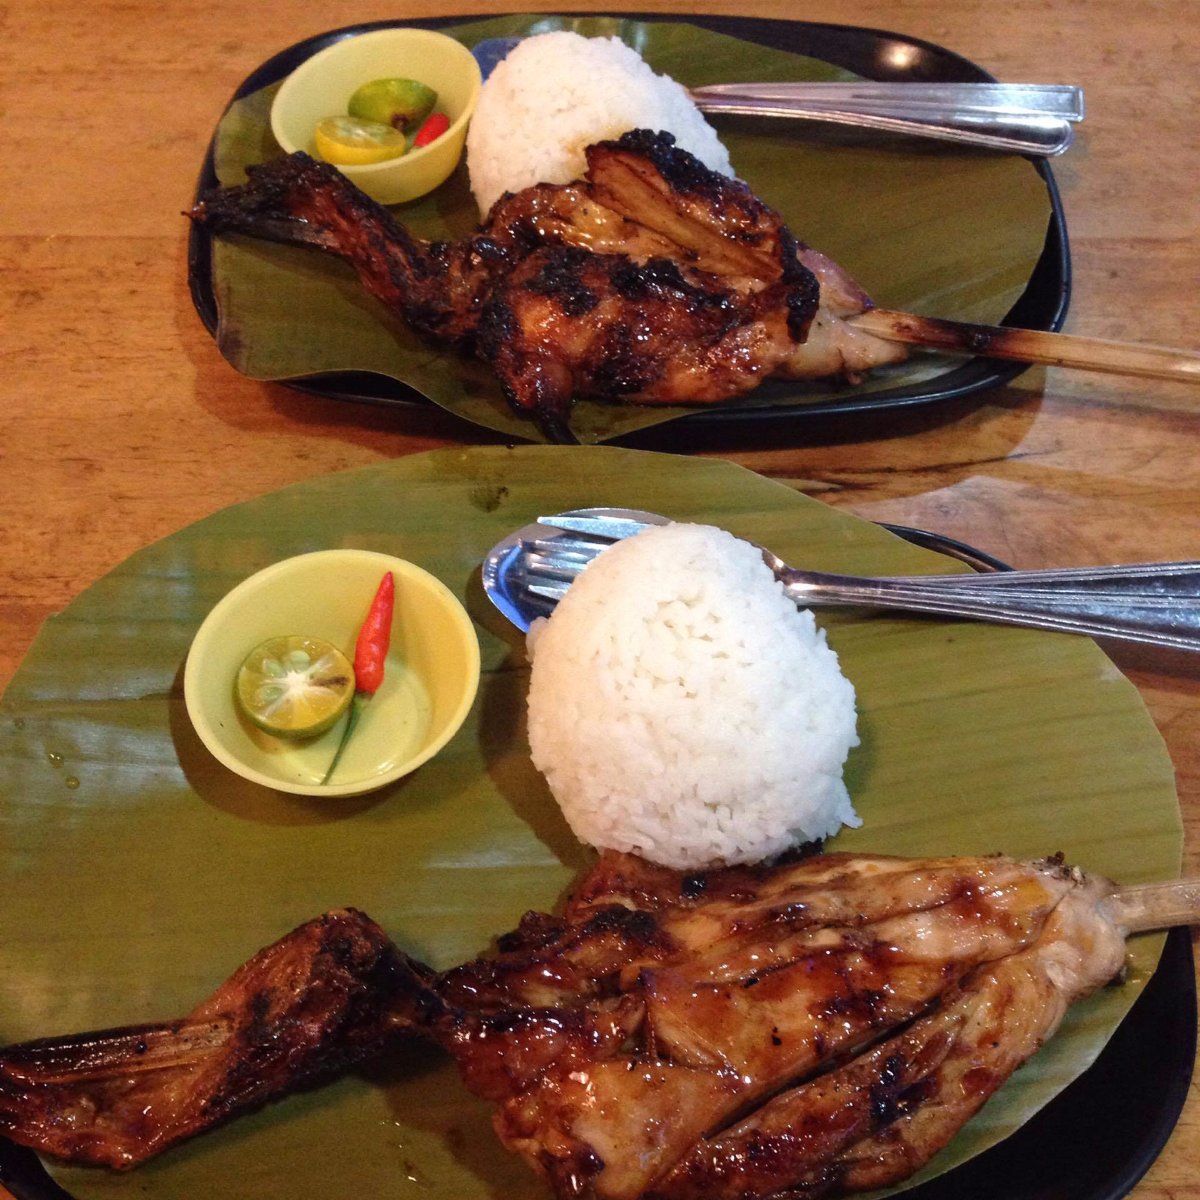 grilled chicken delicious mouth watering the best with rice and sauce happy tummy satisfied